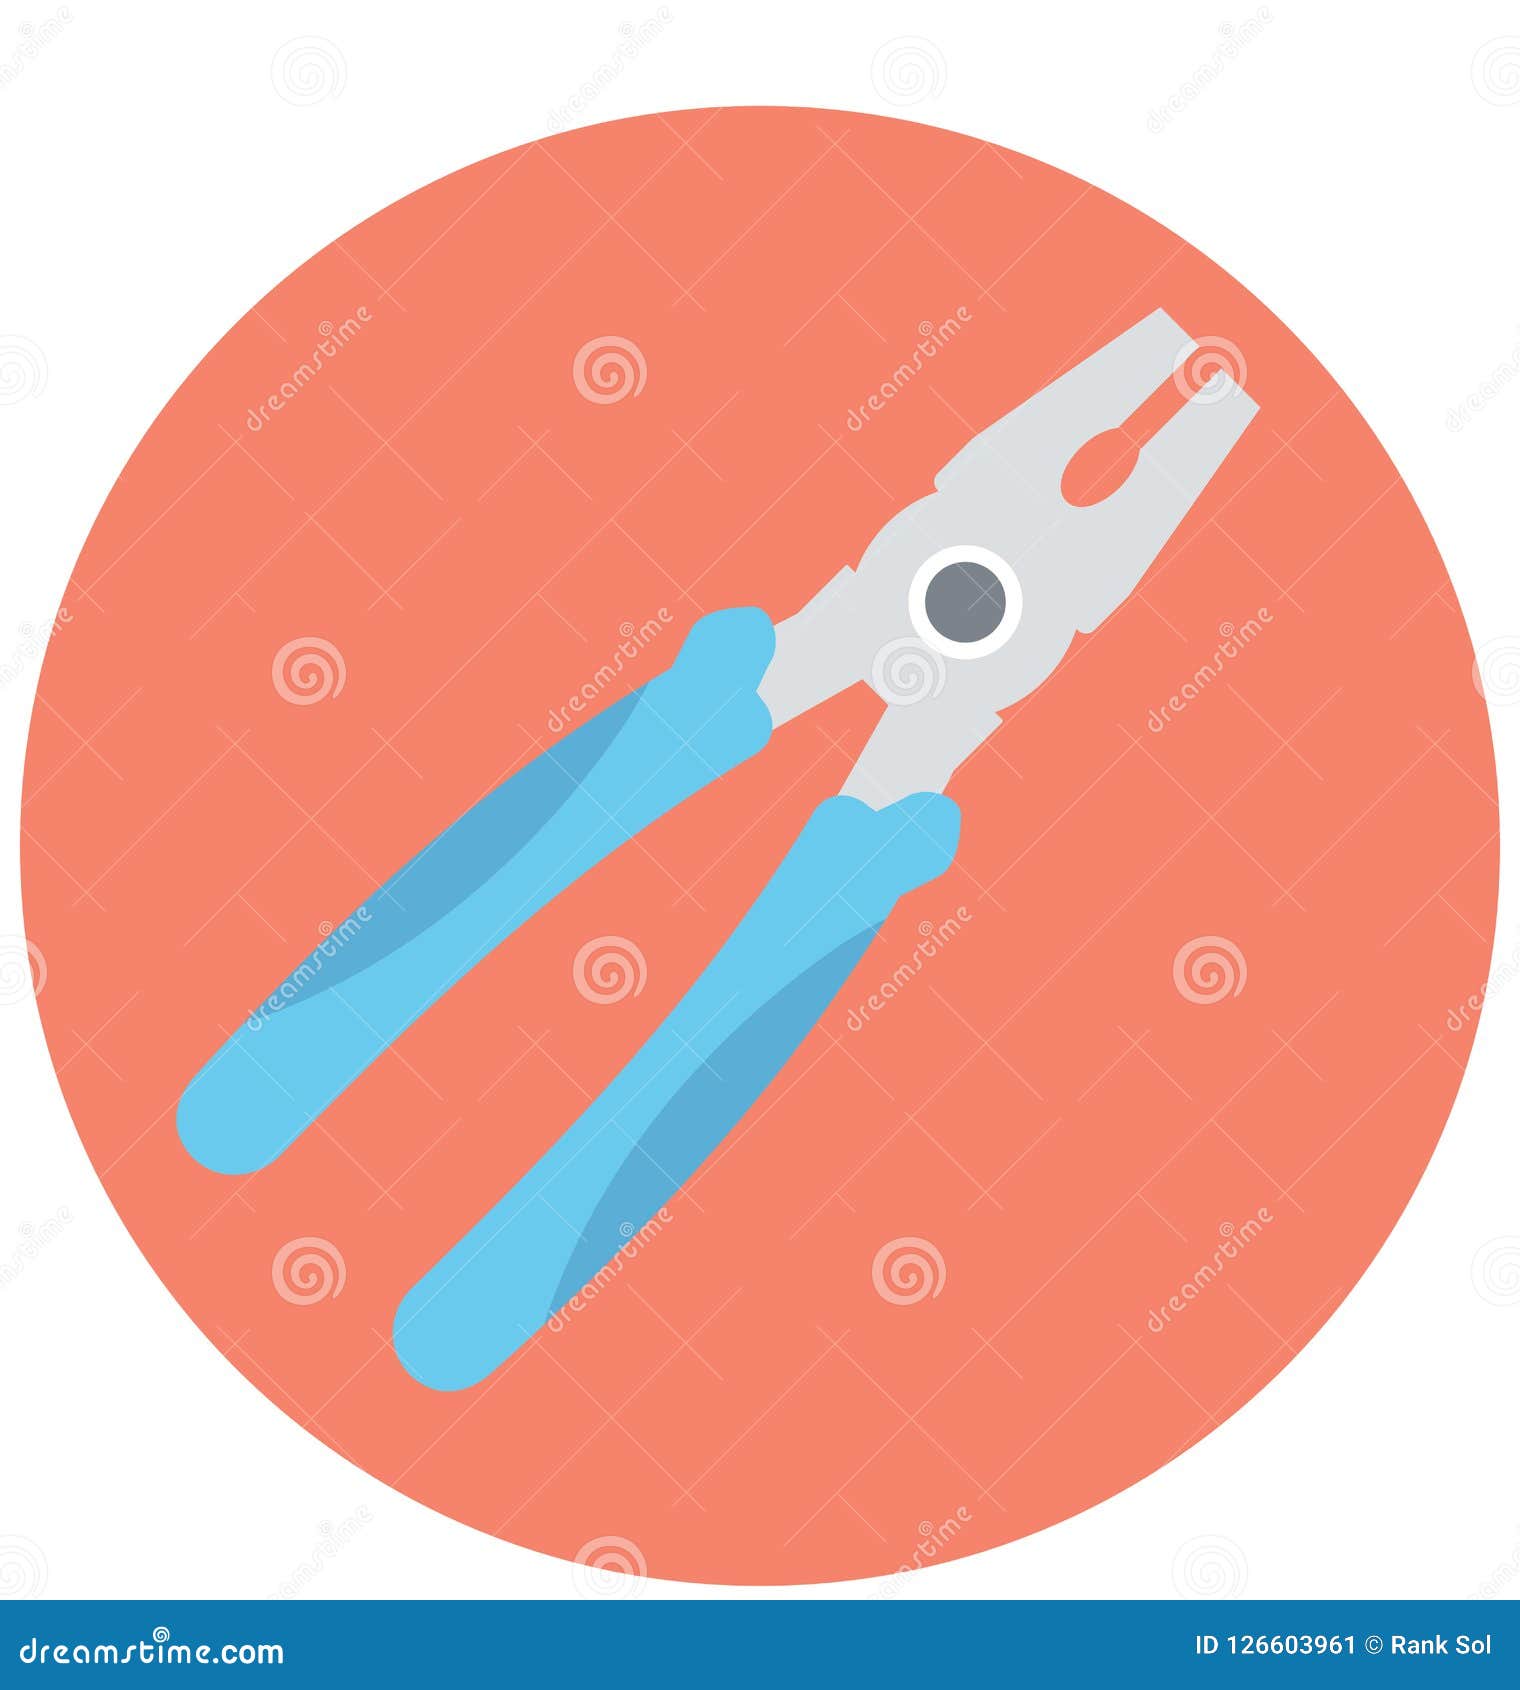 pliers   icon for construction